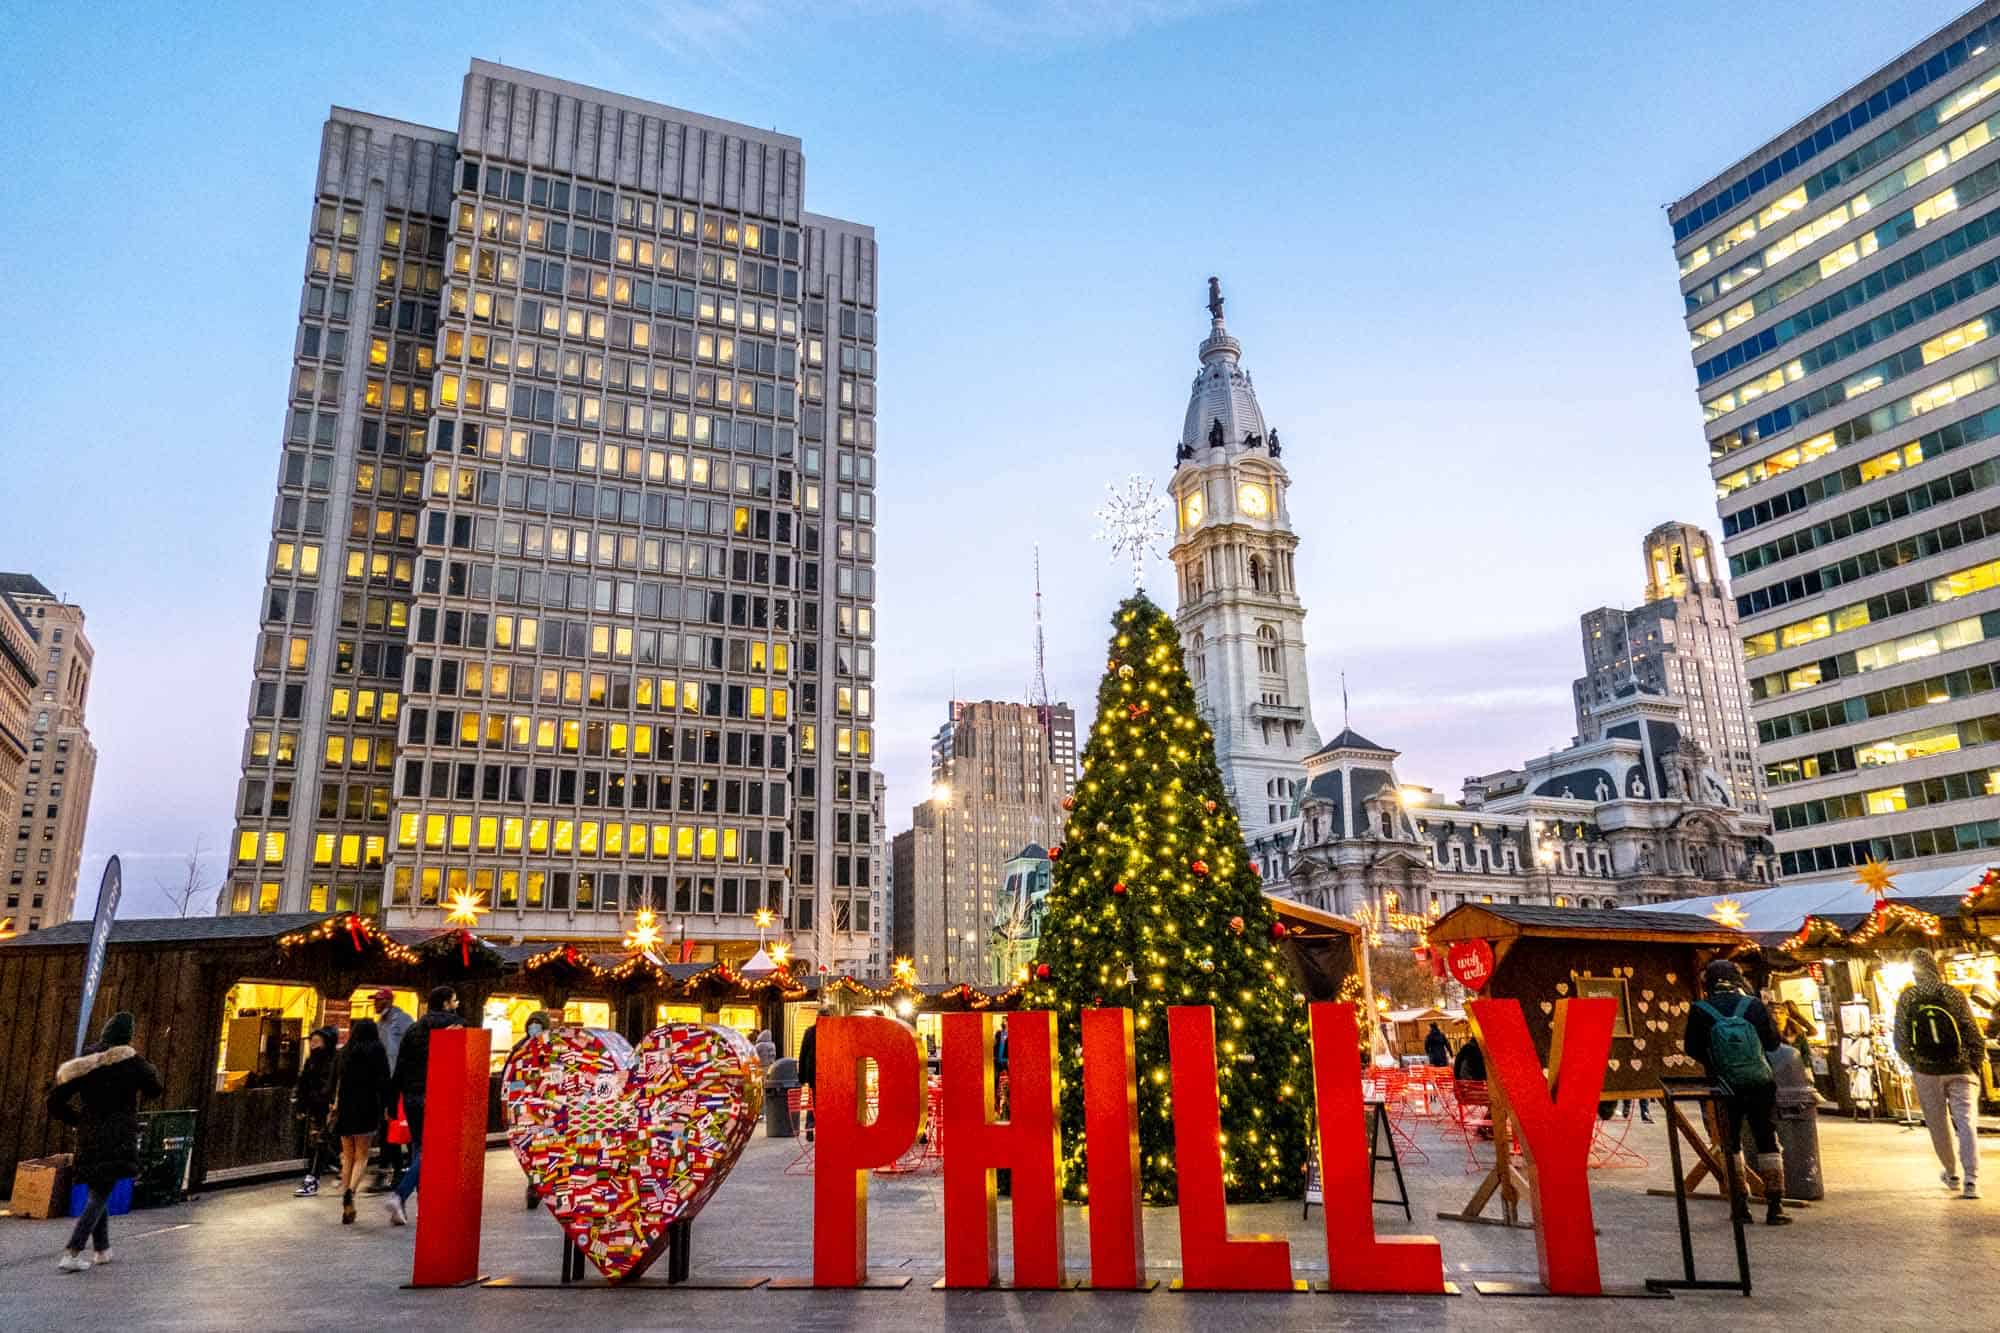 I Heart Philly sign in front of a Christmas tree surrounded by Christmas market stalls